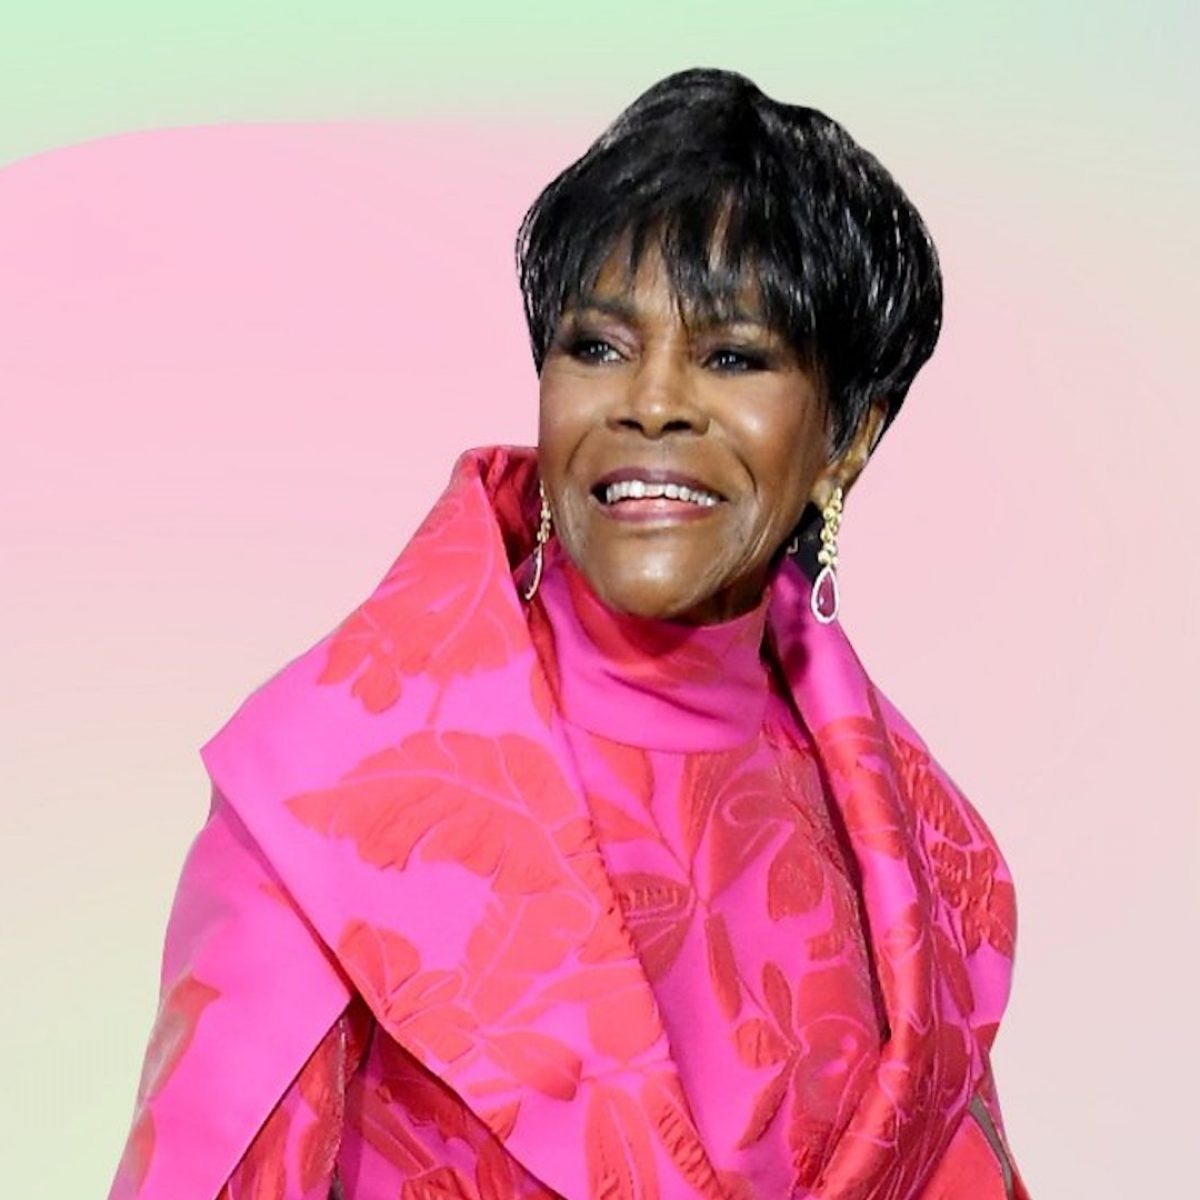 Cicely Tyson's Memoir 'Just As I Am' To Be Released In 2021